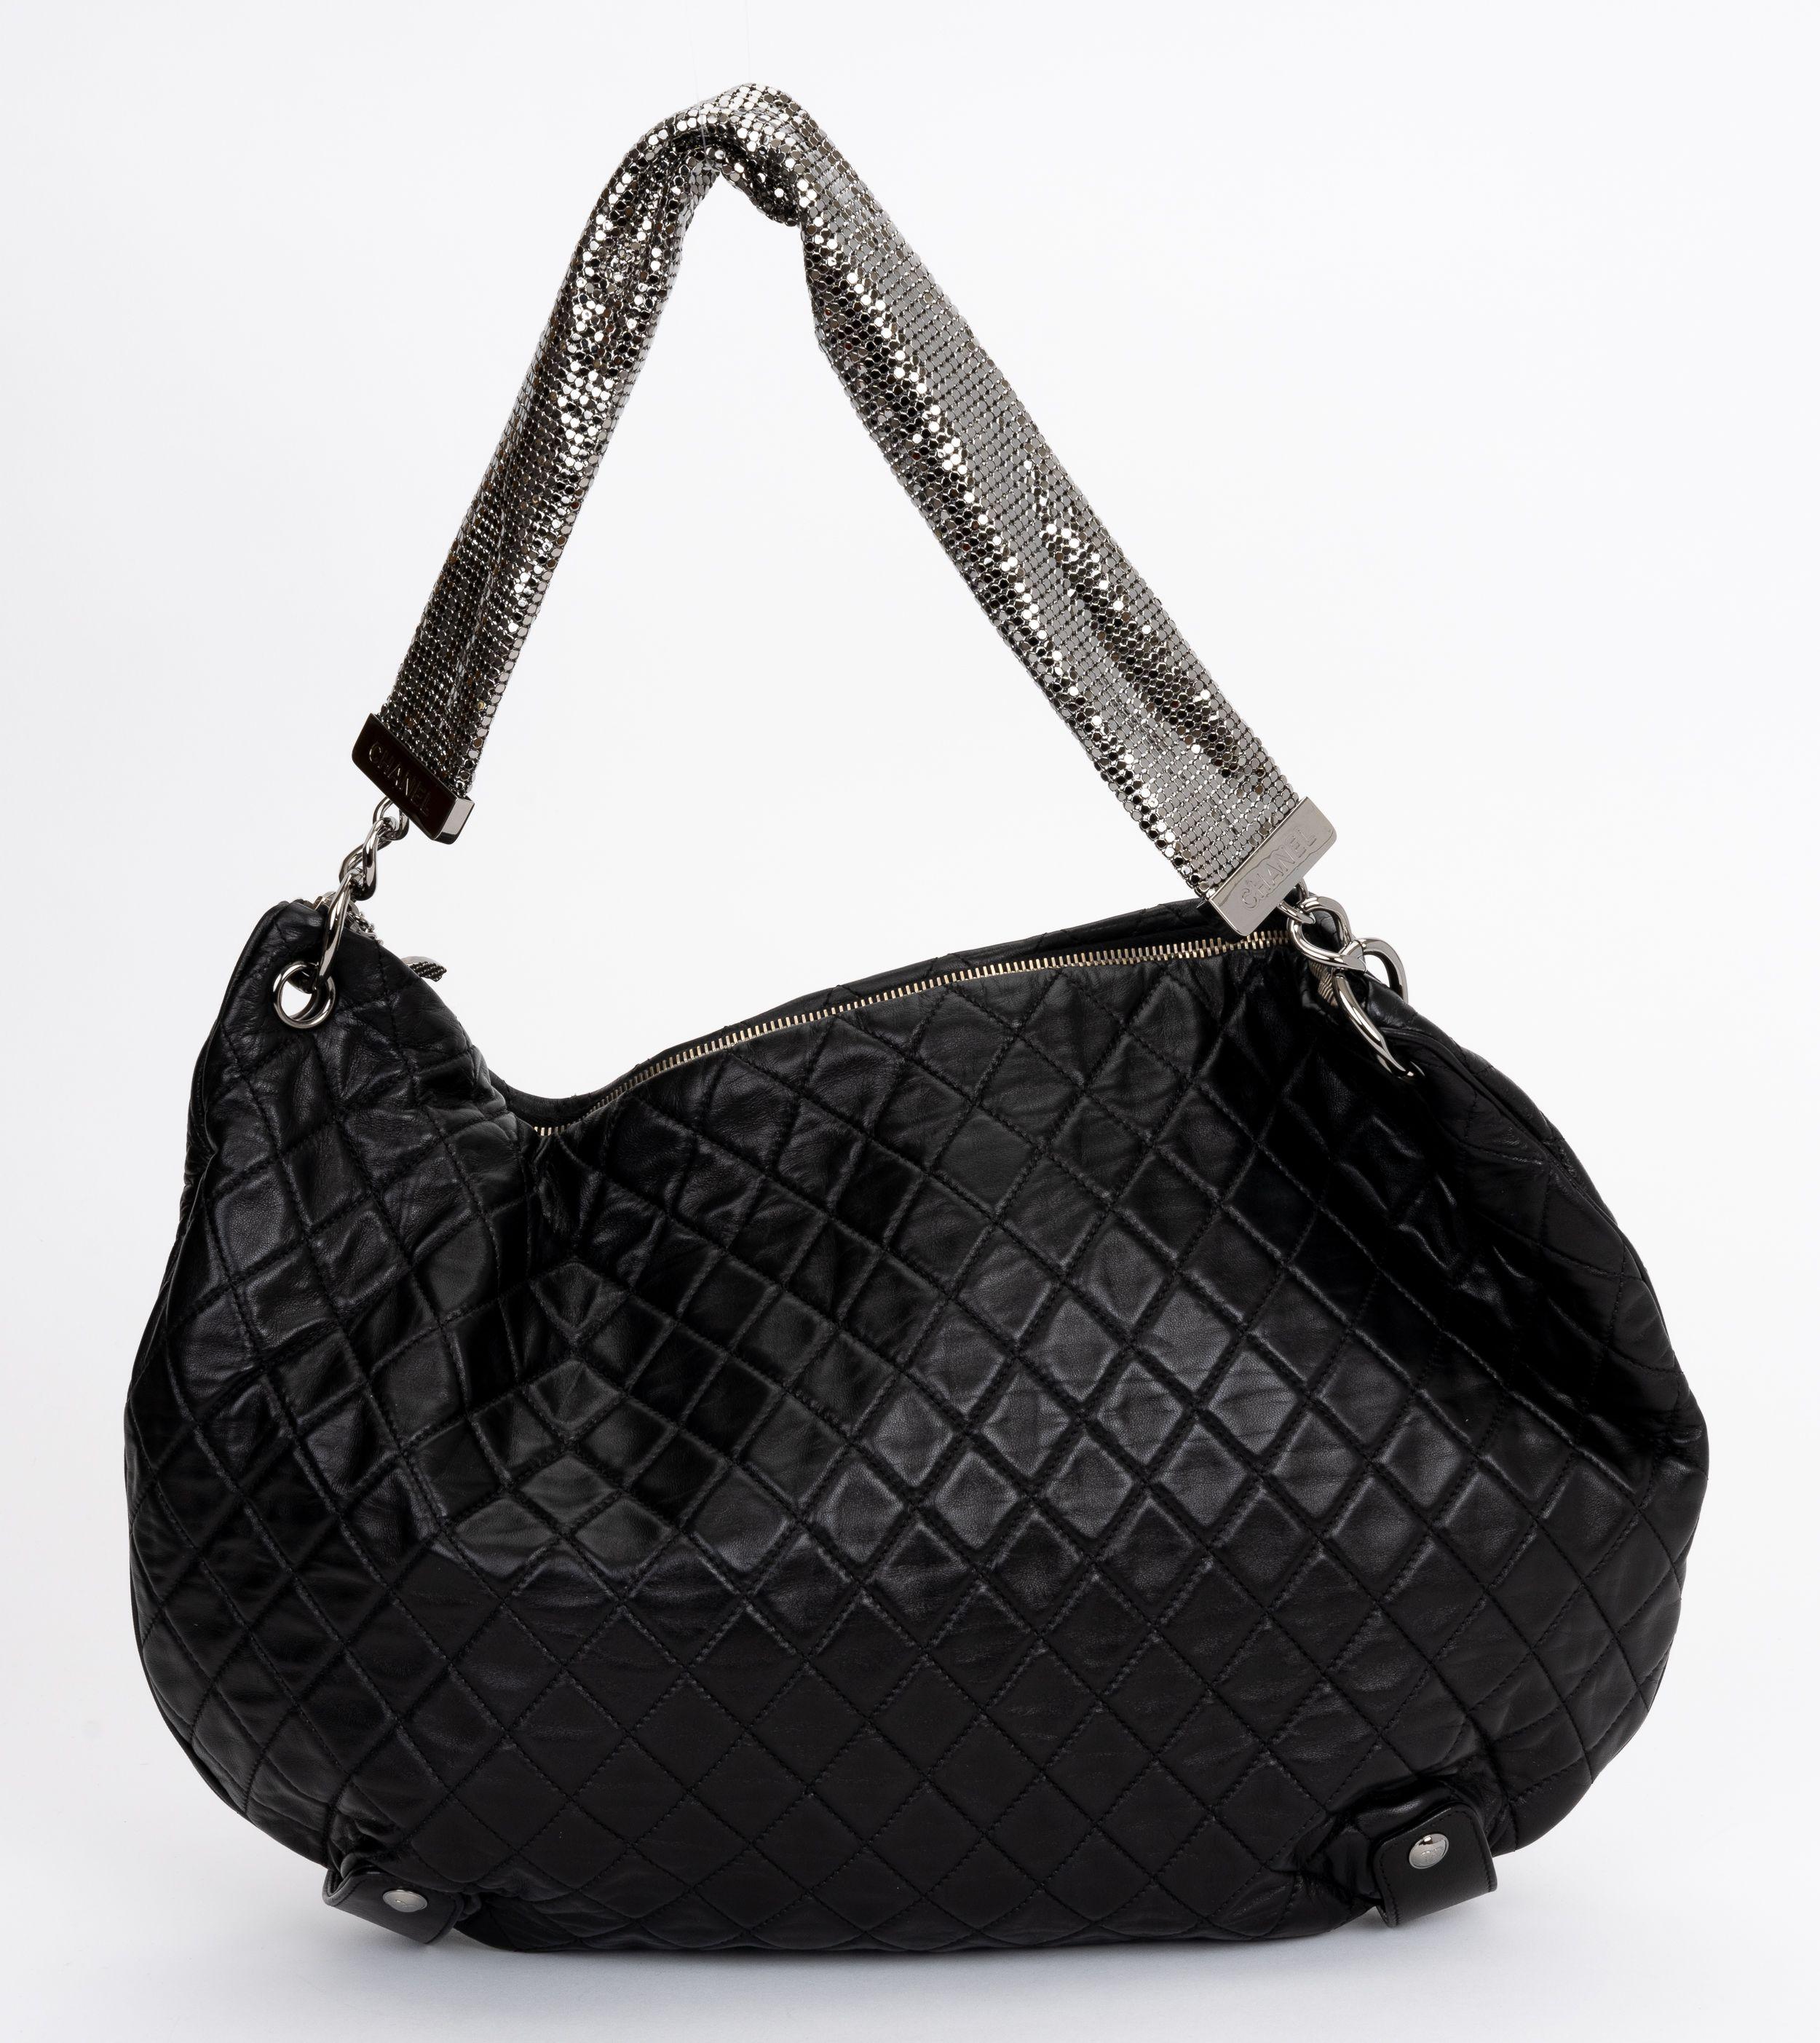 Chanel Black Mesh Chain Mail Bag For Sale 2